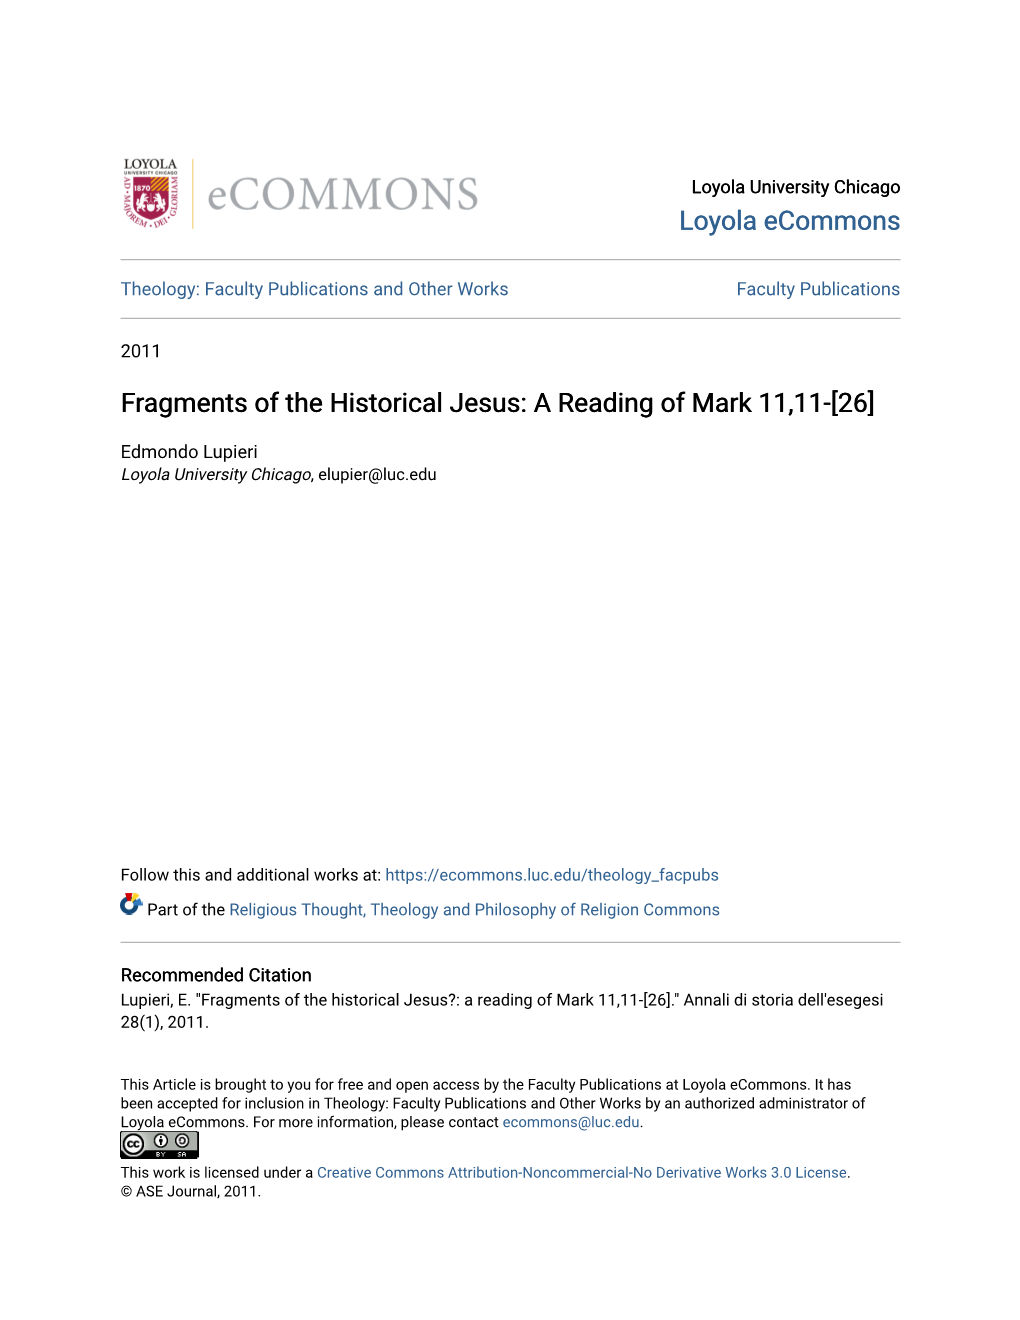 Fragments of the Historical Jesus: a Reading of Mark 11,11-[26]